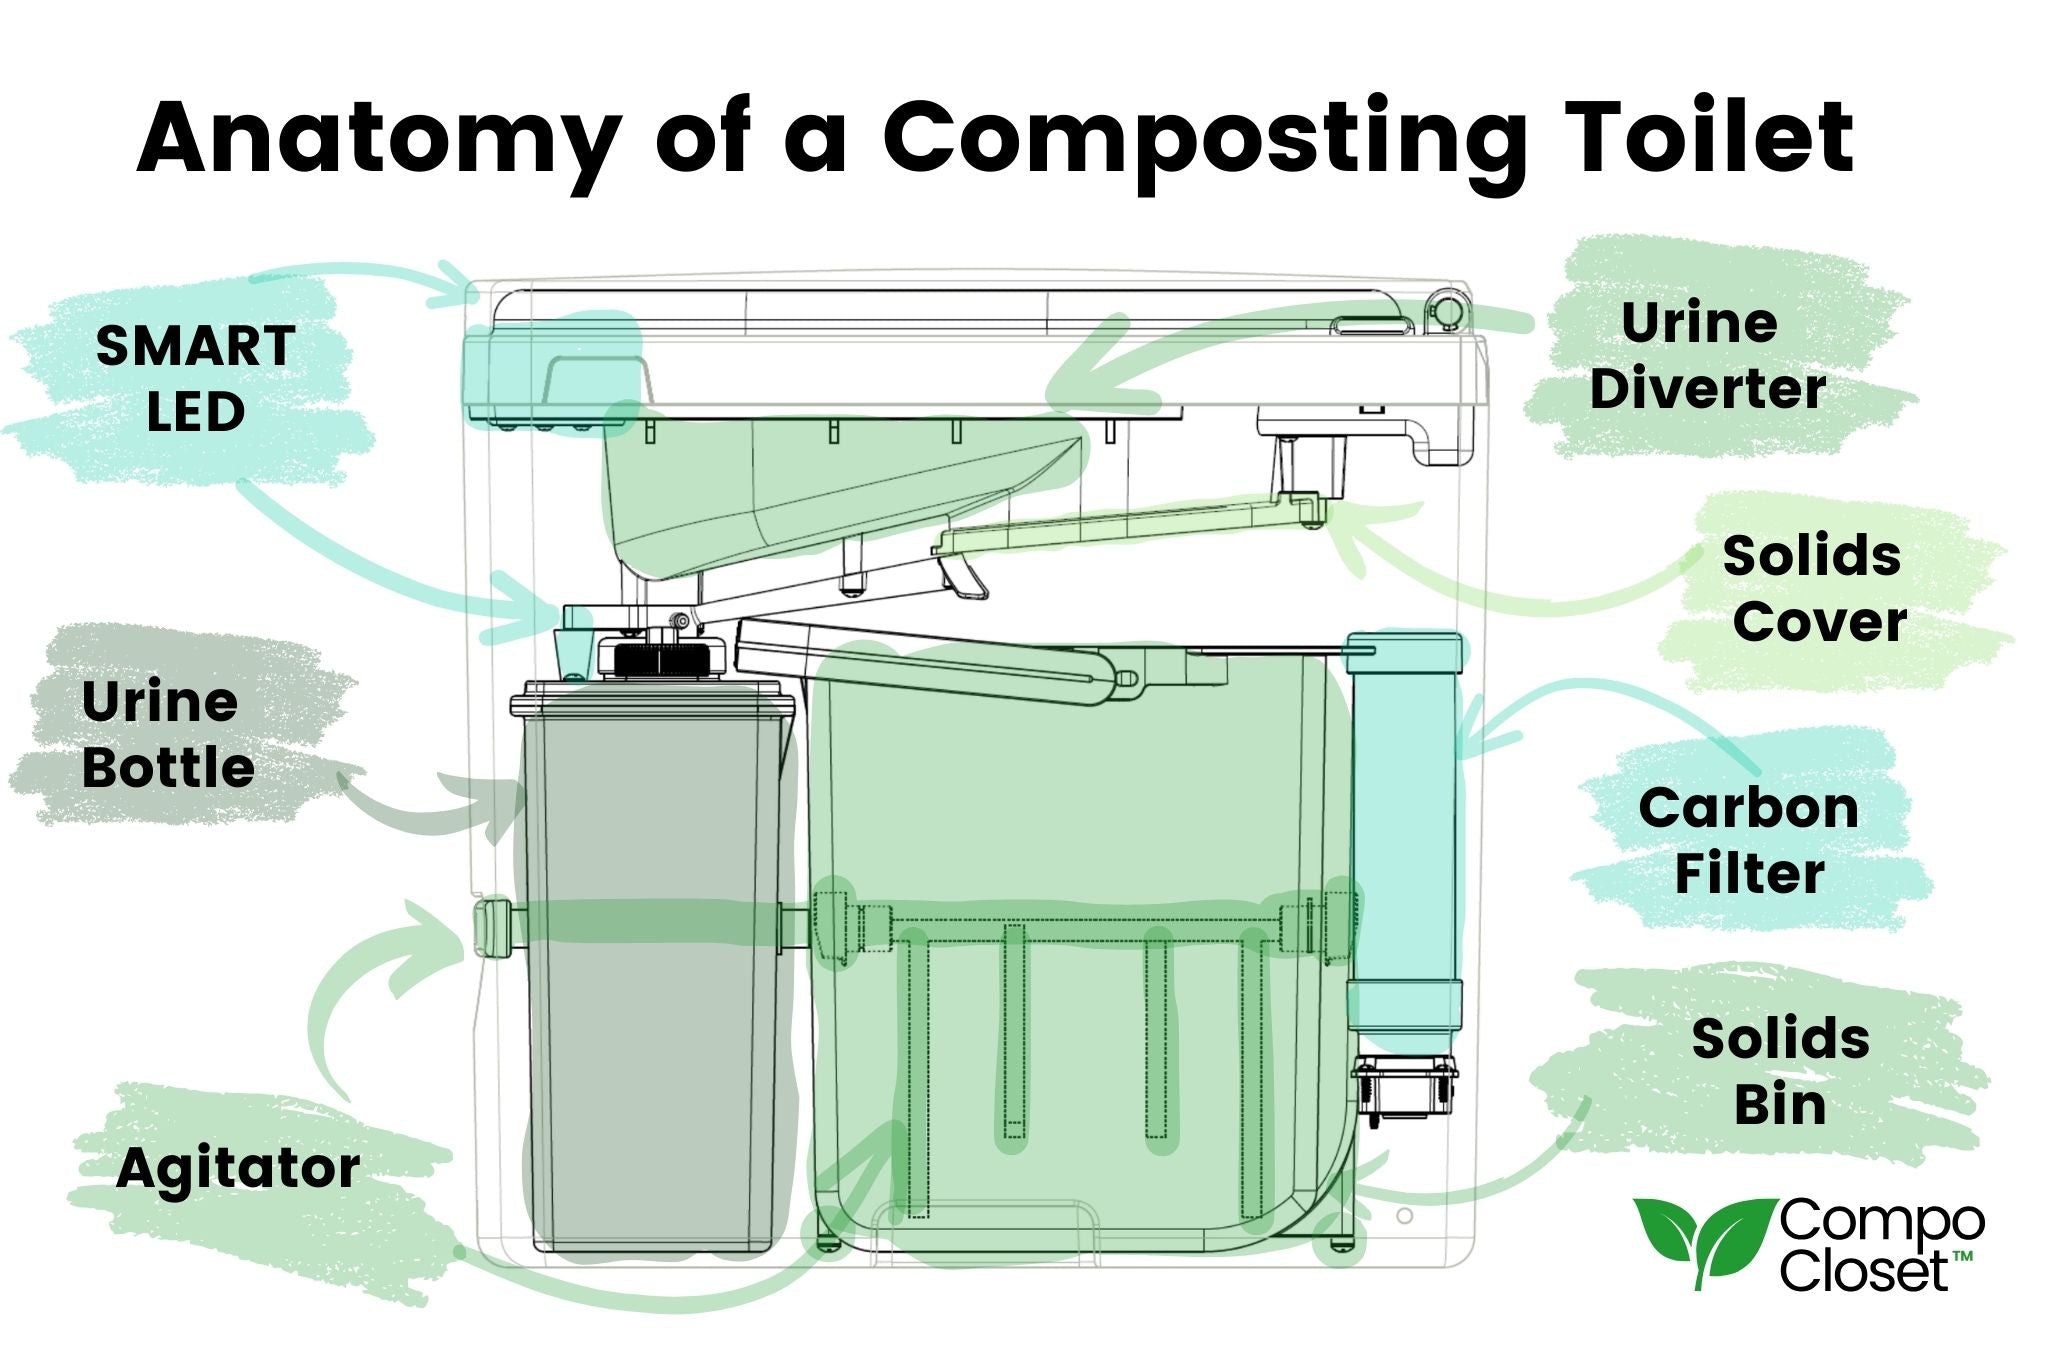 How does a composting toilet work?